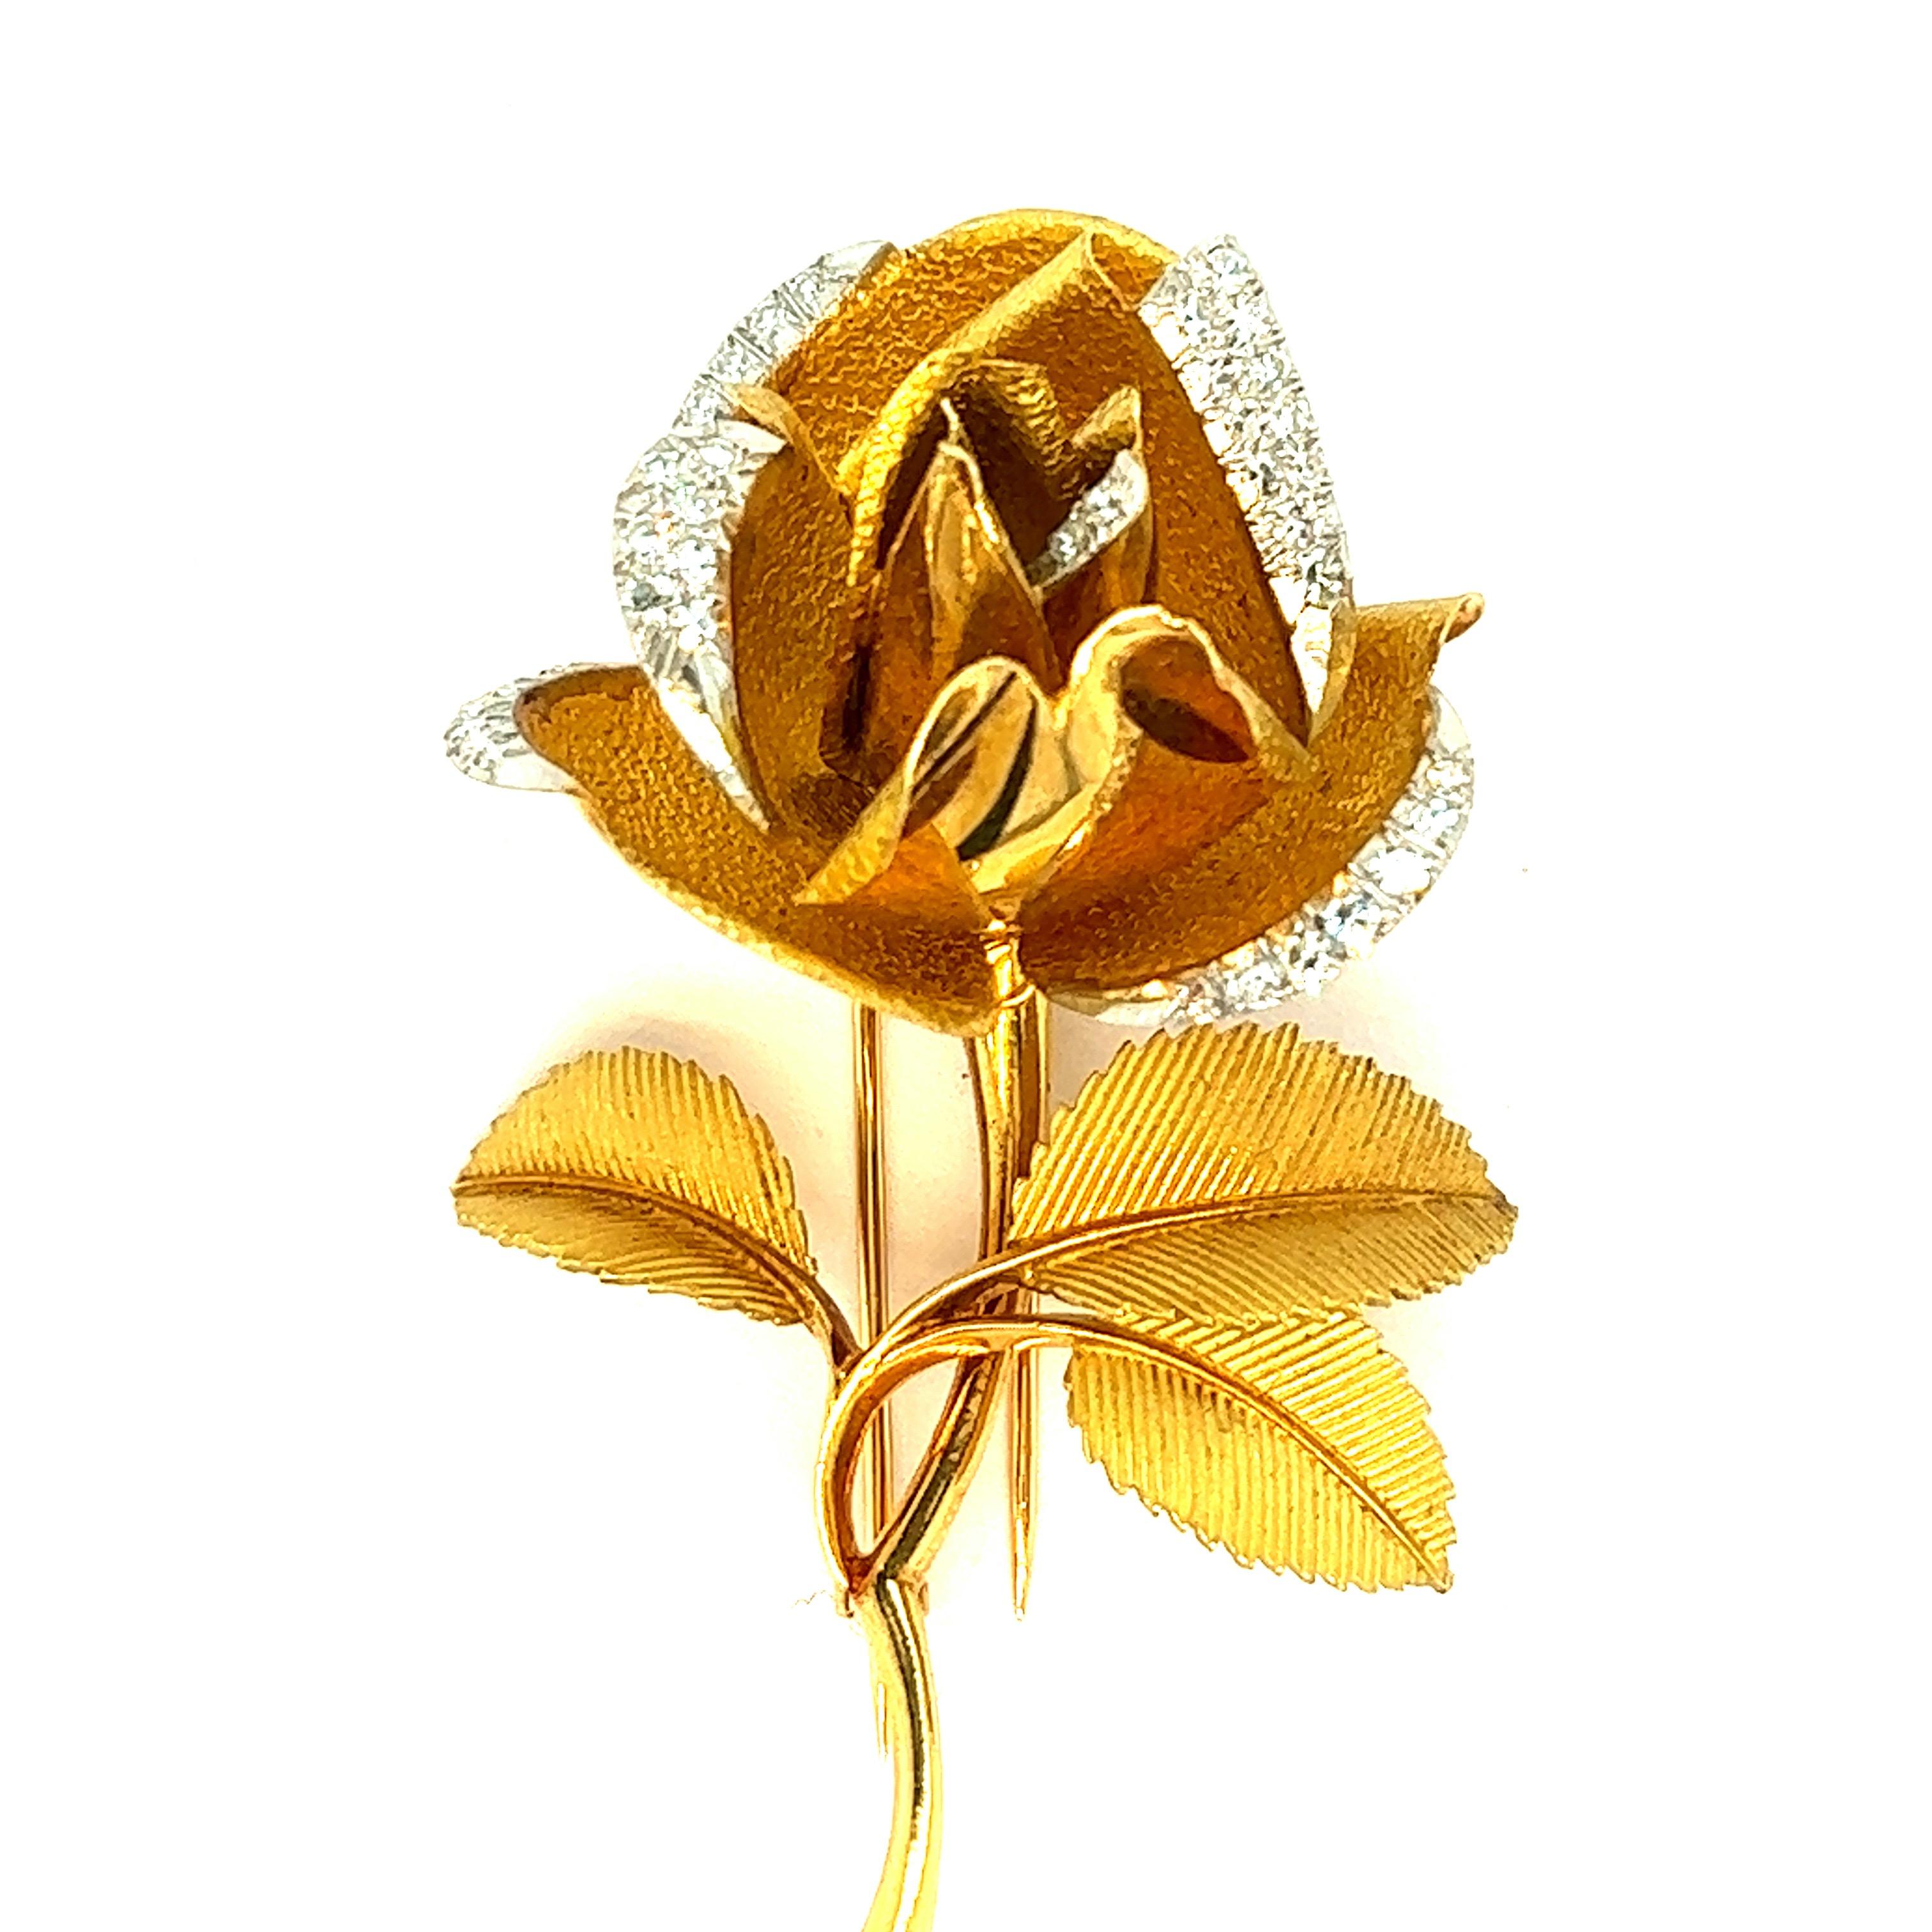 French diamond gold rose brooch, circa 1970s

Very fine and beautiful workmanship done in this brooch made out of round-cut diamonds, 18 karat yellow gold, with a rose flower motif; marked Made in France, OR 18 cts

Size: width 1.56 inches, length